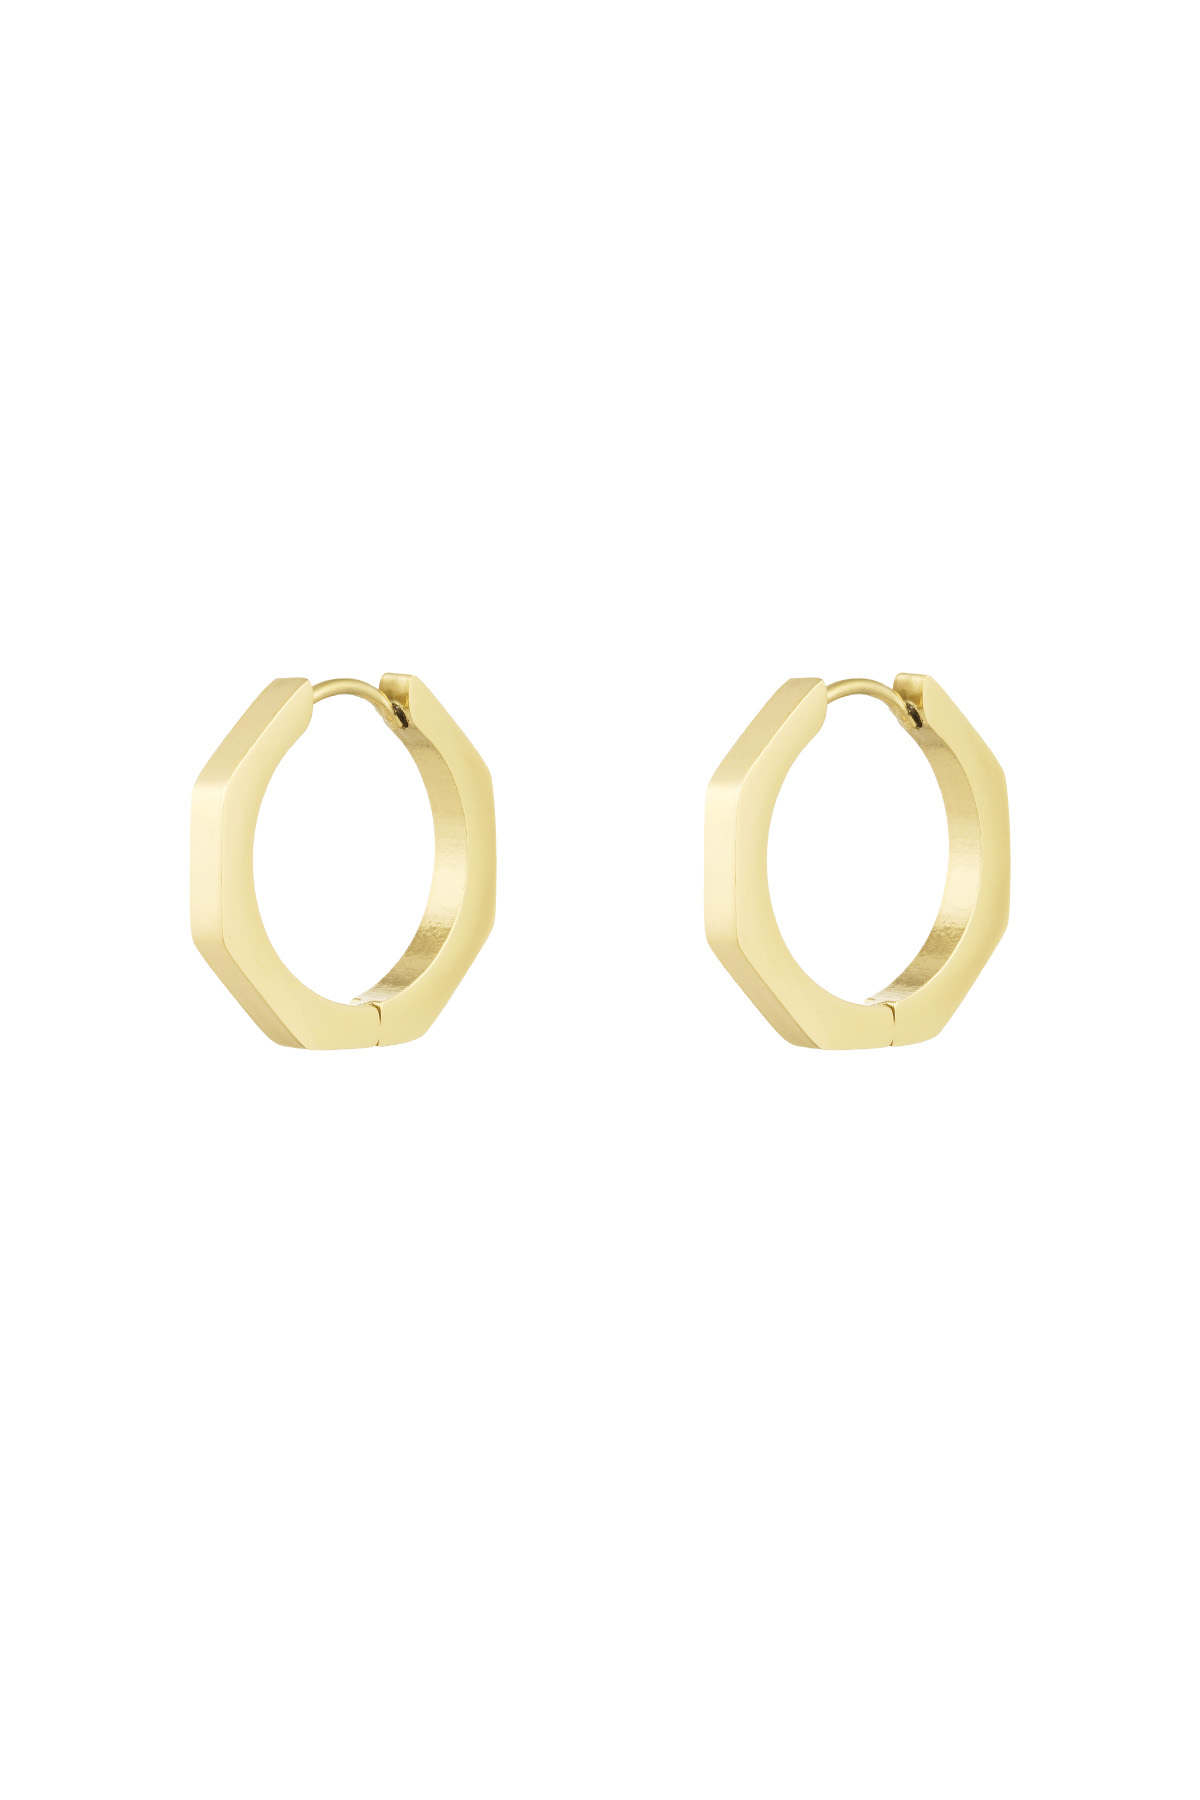 Classic round earrings large - gold 